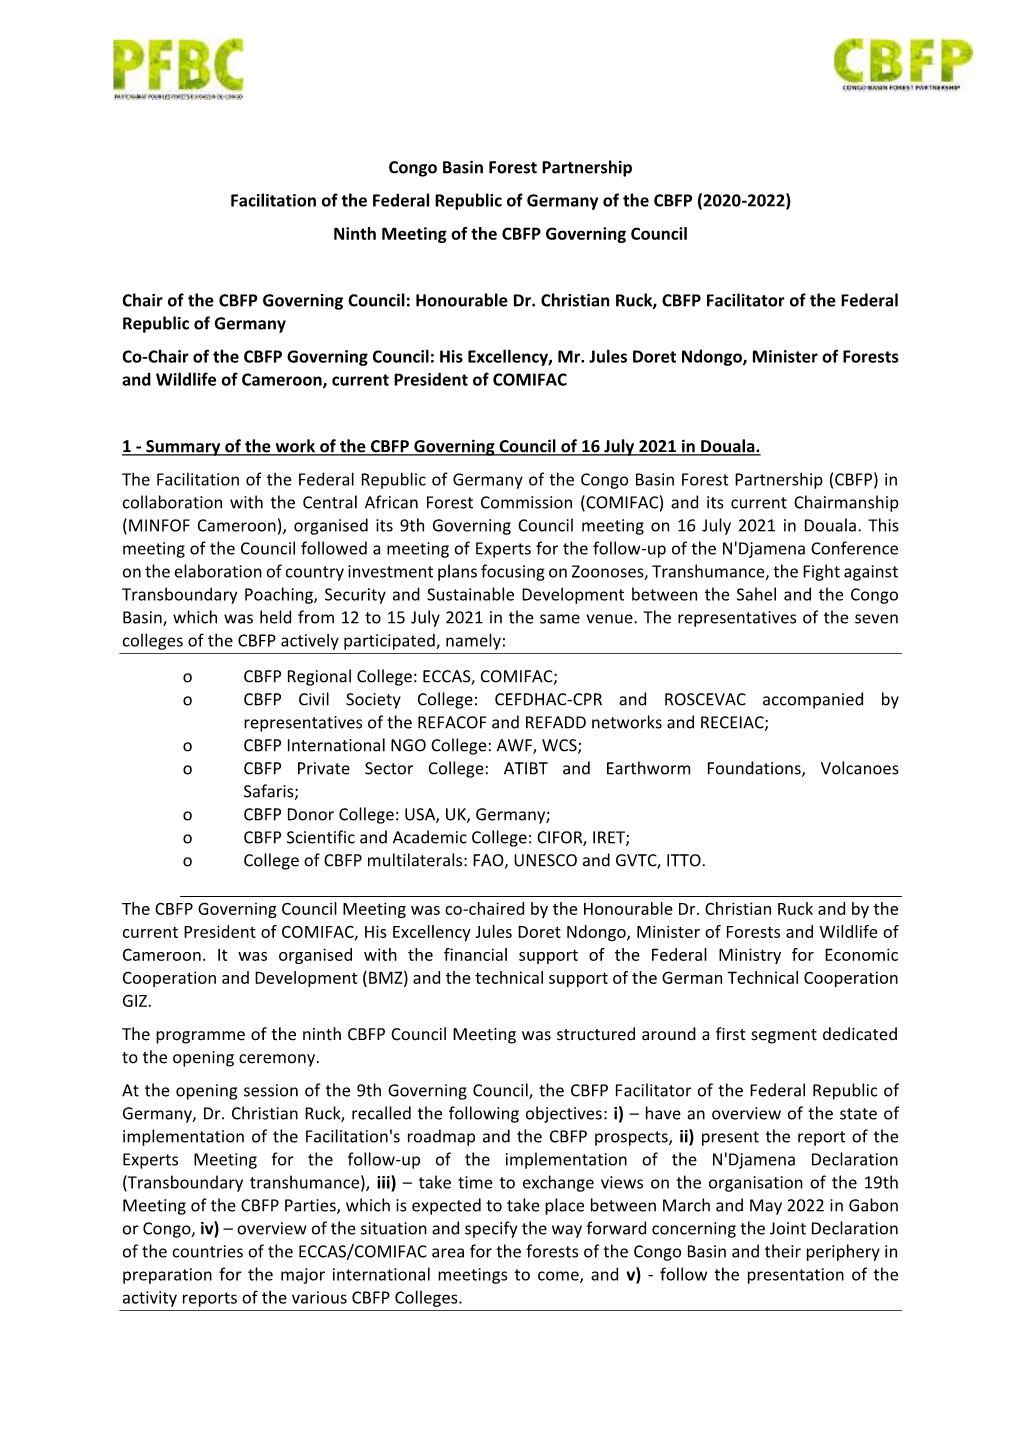 Minutes of the 9Th Meeting of the CBFP Governing Council